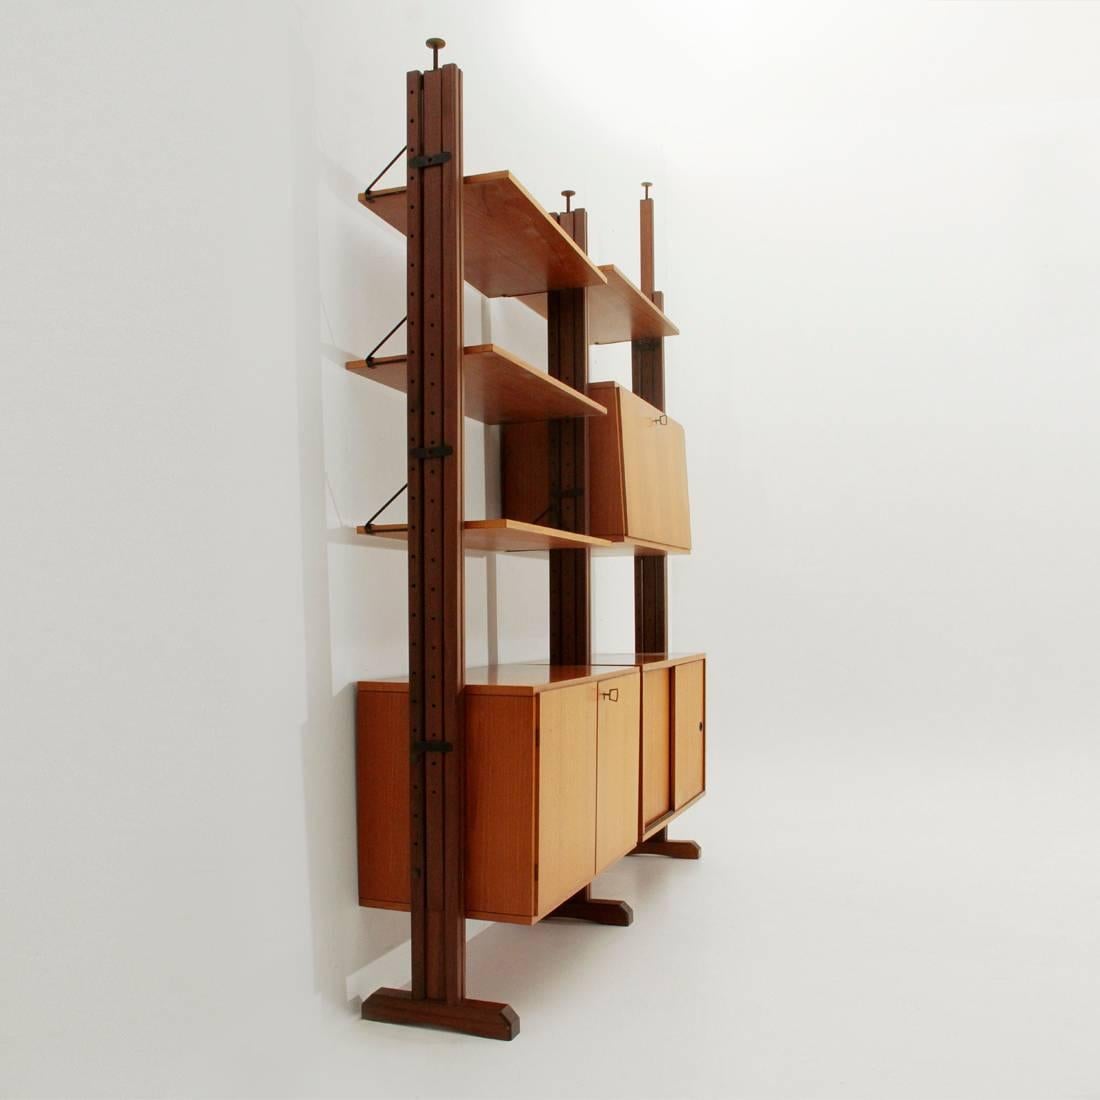 Italian production library of the 1960s.
Adjustable height wooden uprights and brass terminal.
Teak veneered wooden shelves and containers.
Fastening system of shelves in black painted metal.
Good conditions, uprights slightly discolored by